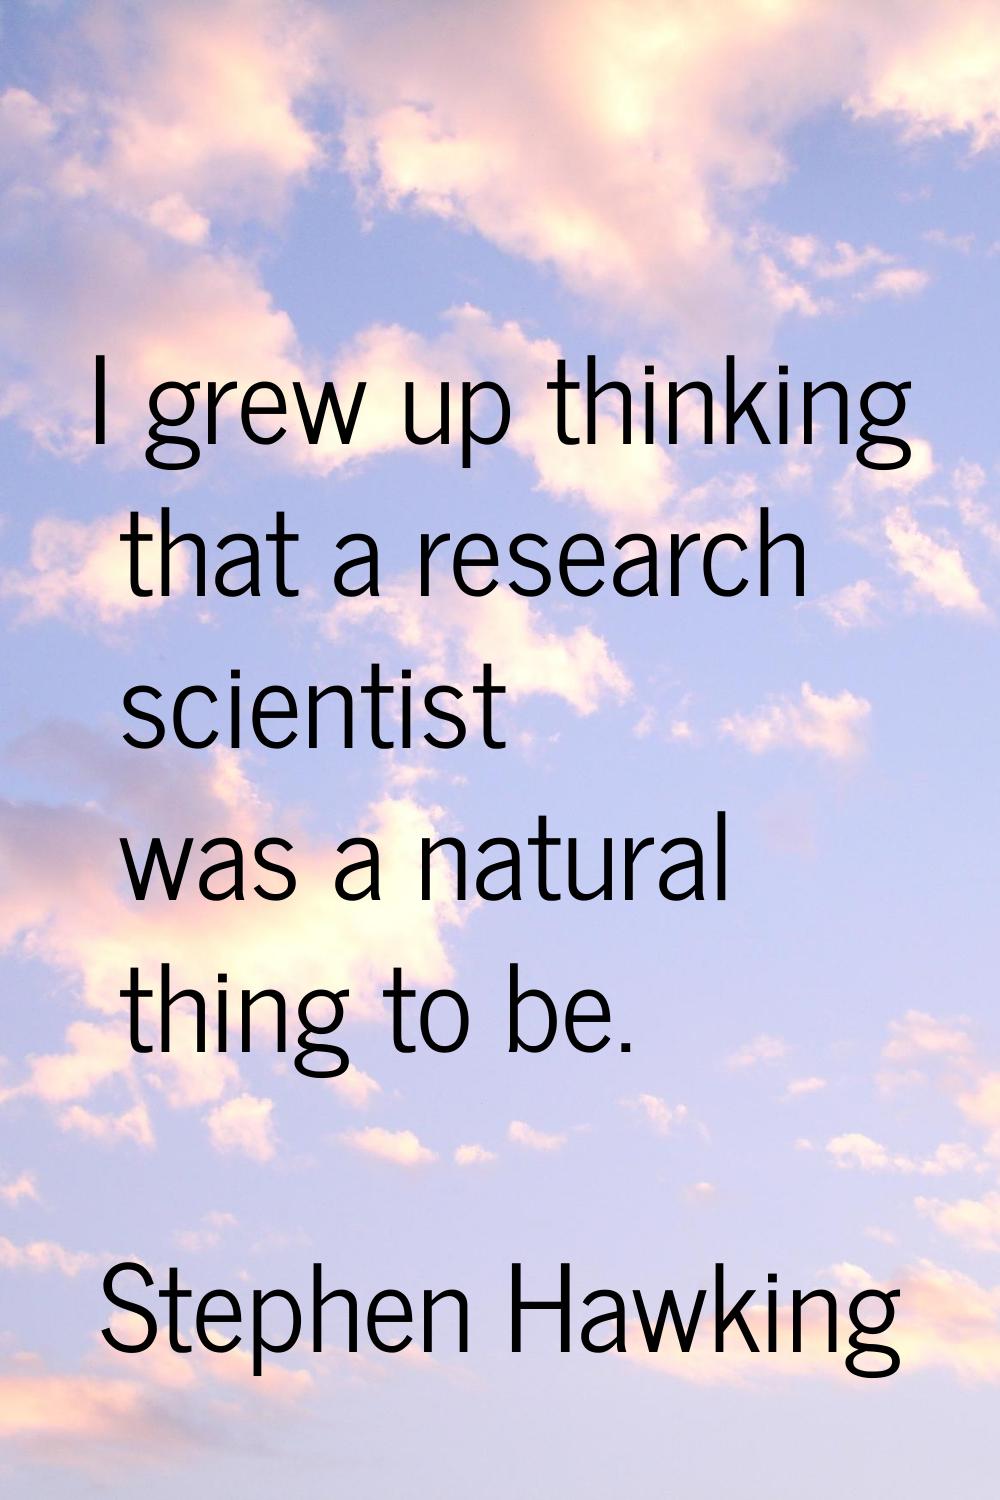 I grew up thinking that a research scientist was a natural thing to be.